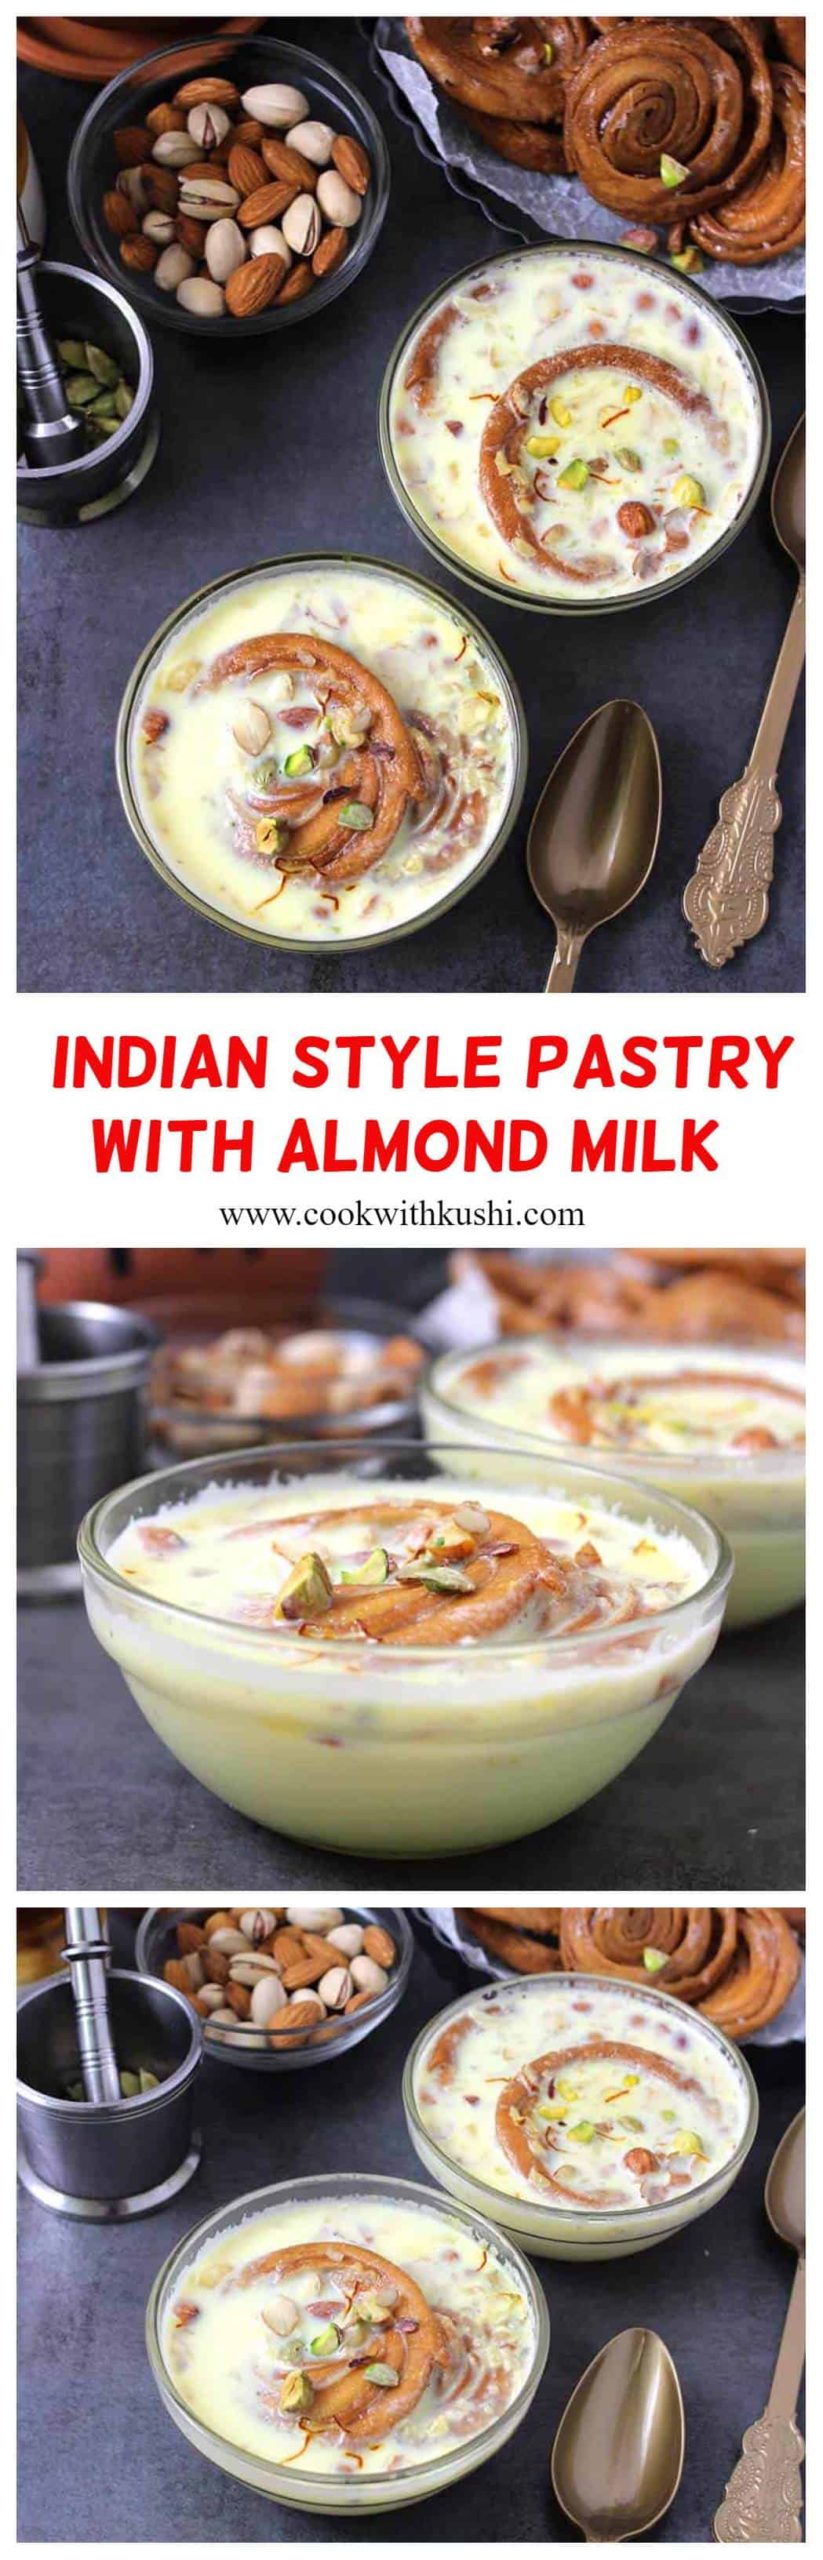 Homemade Badam Milk or Almond Milk is popular and rich, creamy and flavorful Indian recipe where almonds are combined with milk and flavored with saffron (kesar) and cardamom. #almondmilk #badammilk #indiansweets #indiandesserts #diwalirecipes #festivalfood #holidaydesserts #homemadealmondmilk